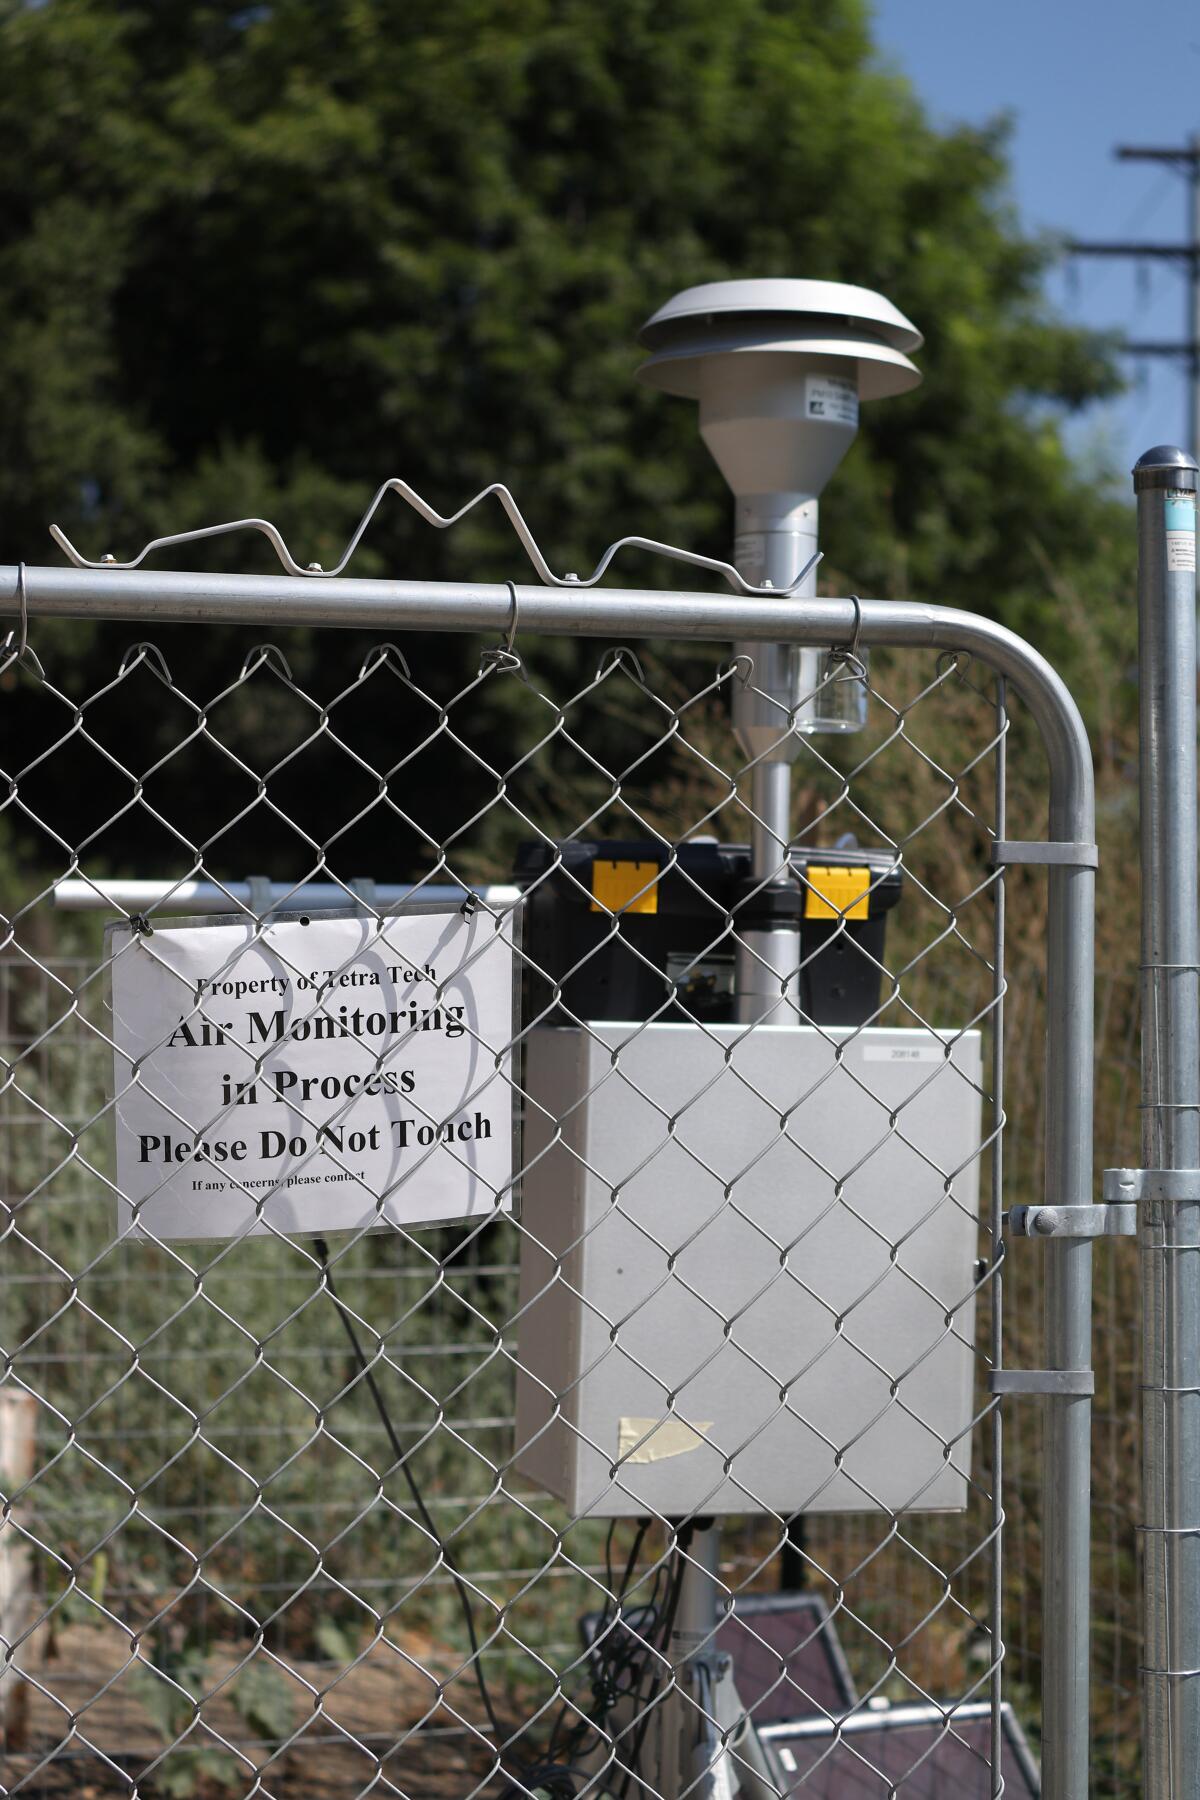 Phase II air quality monitoring will include a pilot study in which diesel fuel emissions will be measured directly from the tailpipes of diesel trucks taking part in a pilot study planned for Devil's Gate Dam.